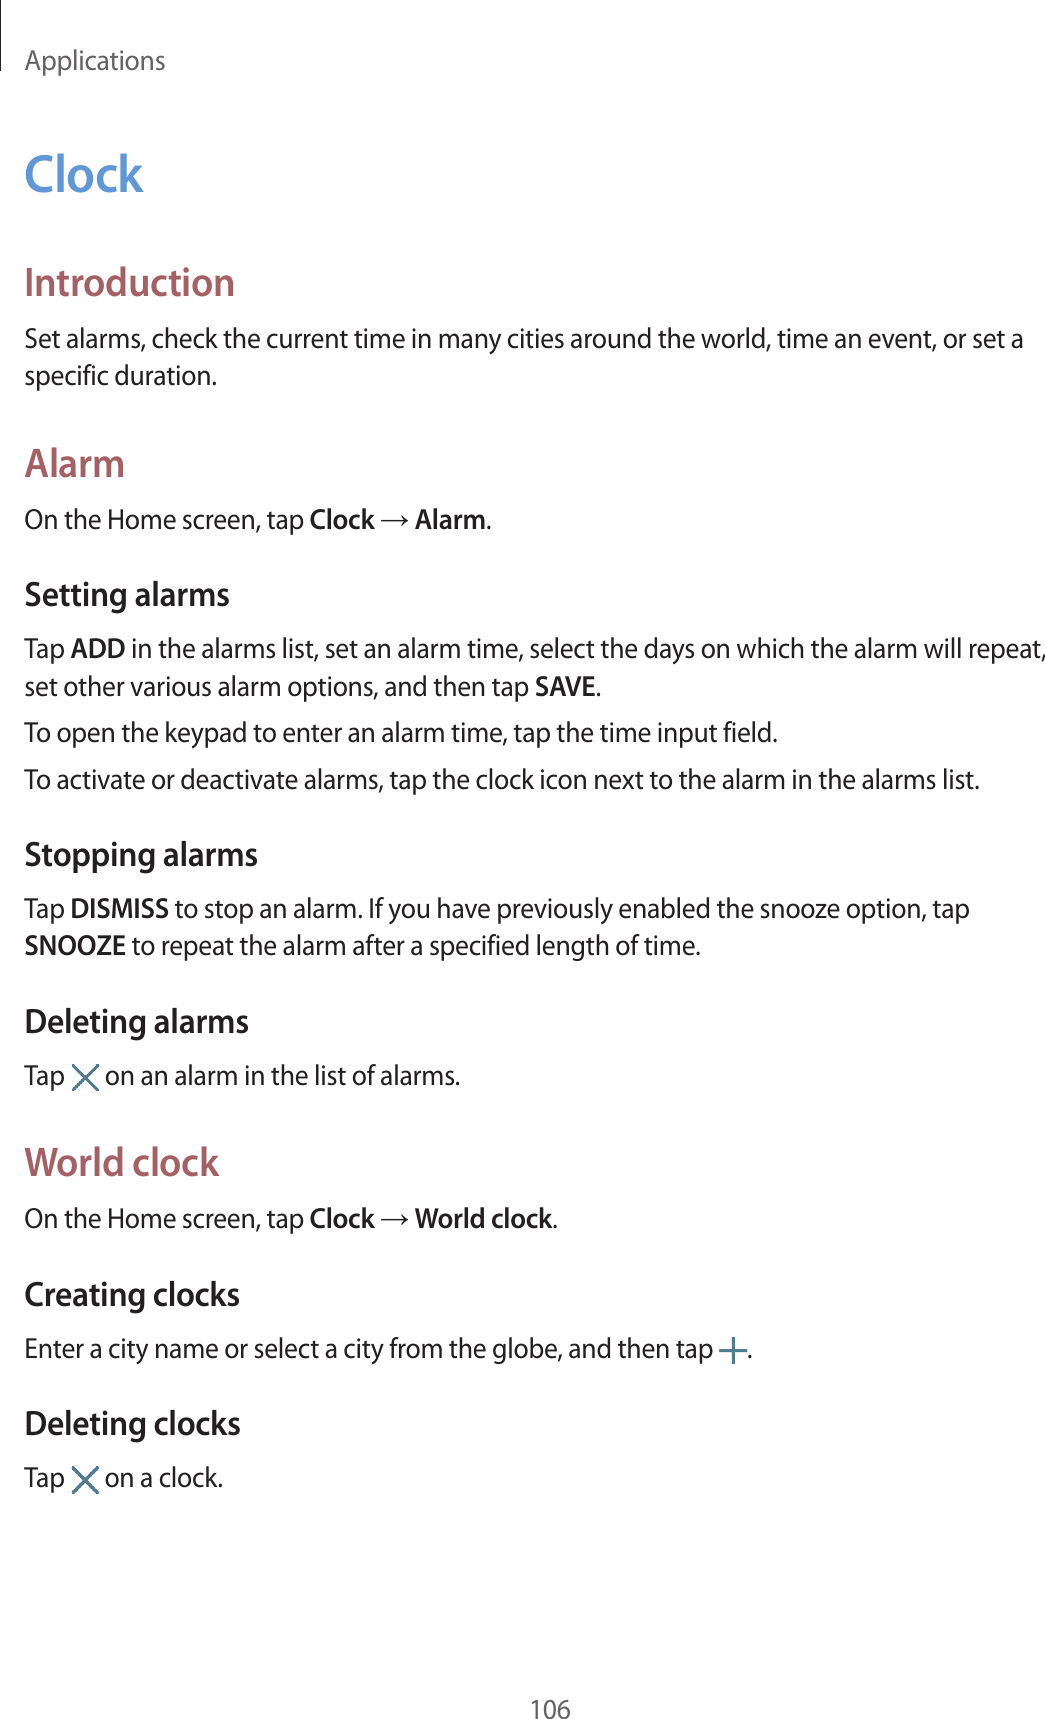 Applications106ClockIntroductionSet alarms, check the current time in many cities around the world, time an event, or set a specific duration.AlarmOn the Home screen, tap Clock → Alarm.Setting alarmsTap ADD in the alarms list, set an alarm time, select the days on which the alarm will repeat, set other various alarm options, and then tap SAVE.To open the keypad to enter an alarm time, tap the time input field.To activate or deactivate alarms, tap the clock icon next to the alarm in the alarms list.Stopping alarmsTap DISMISS to stop an alarm. If you have previously enabled the snooze option, tap SNOOZE to repeat the alarm after a specified length of time.Deleting alarmsTap   on an alarm in the list of alarms.World clockOn the Home screen, tap Clock → World clock.Creating clocksEnter a city name or select a city from the globe, and then tap  .Deleting clocksTap   on a clock.